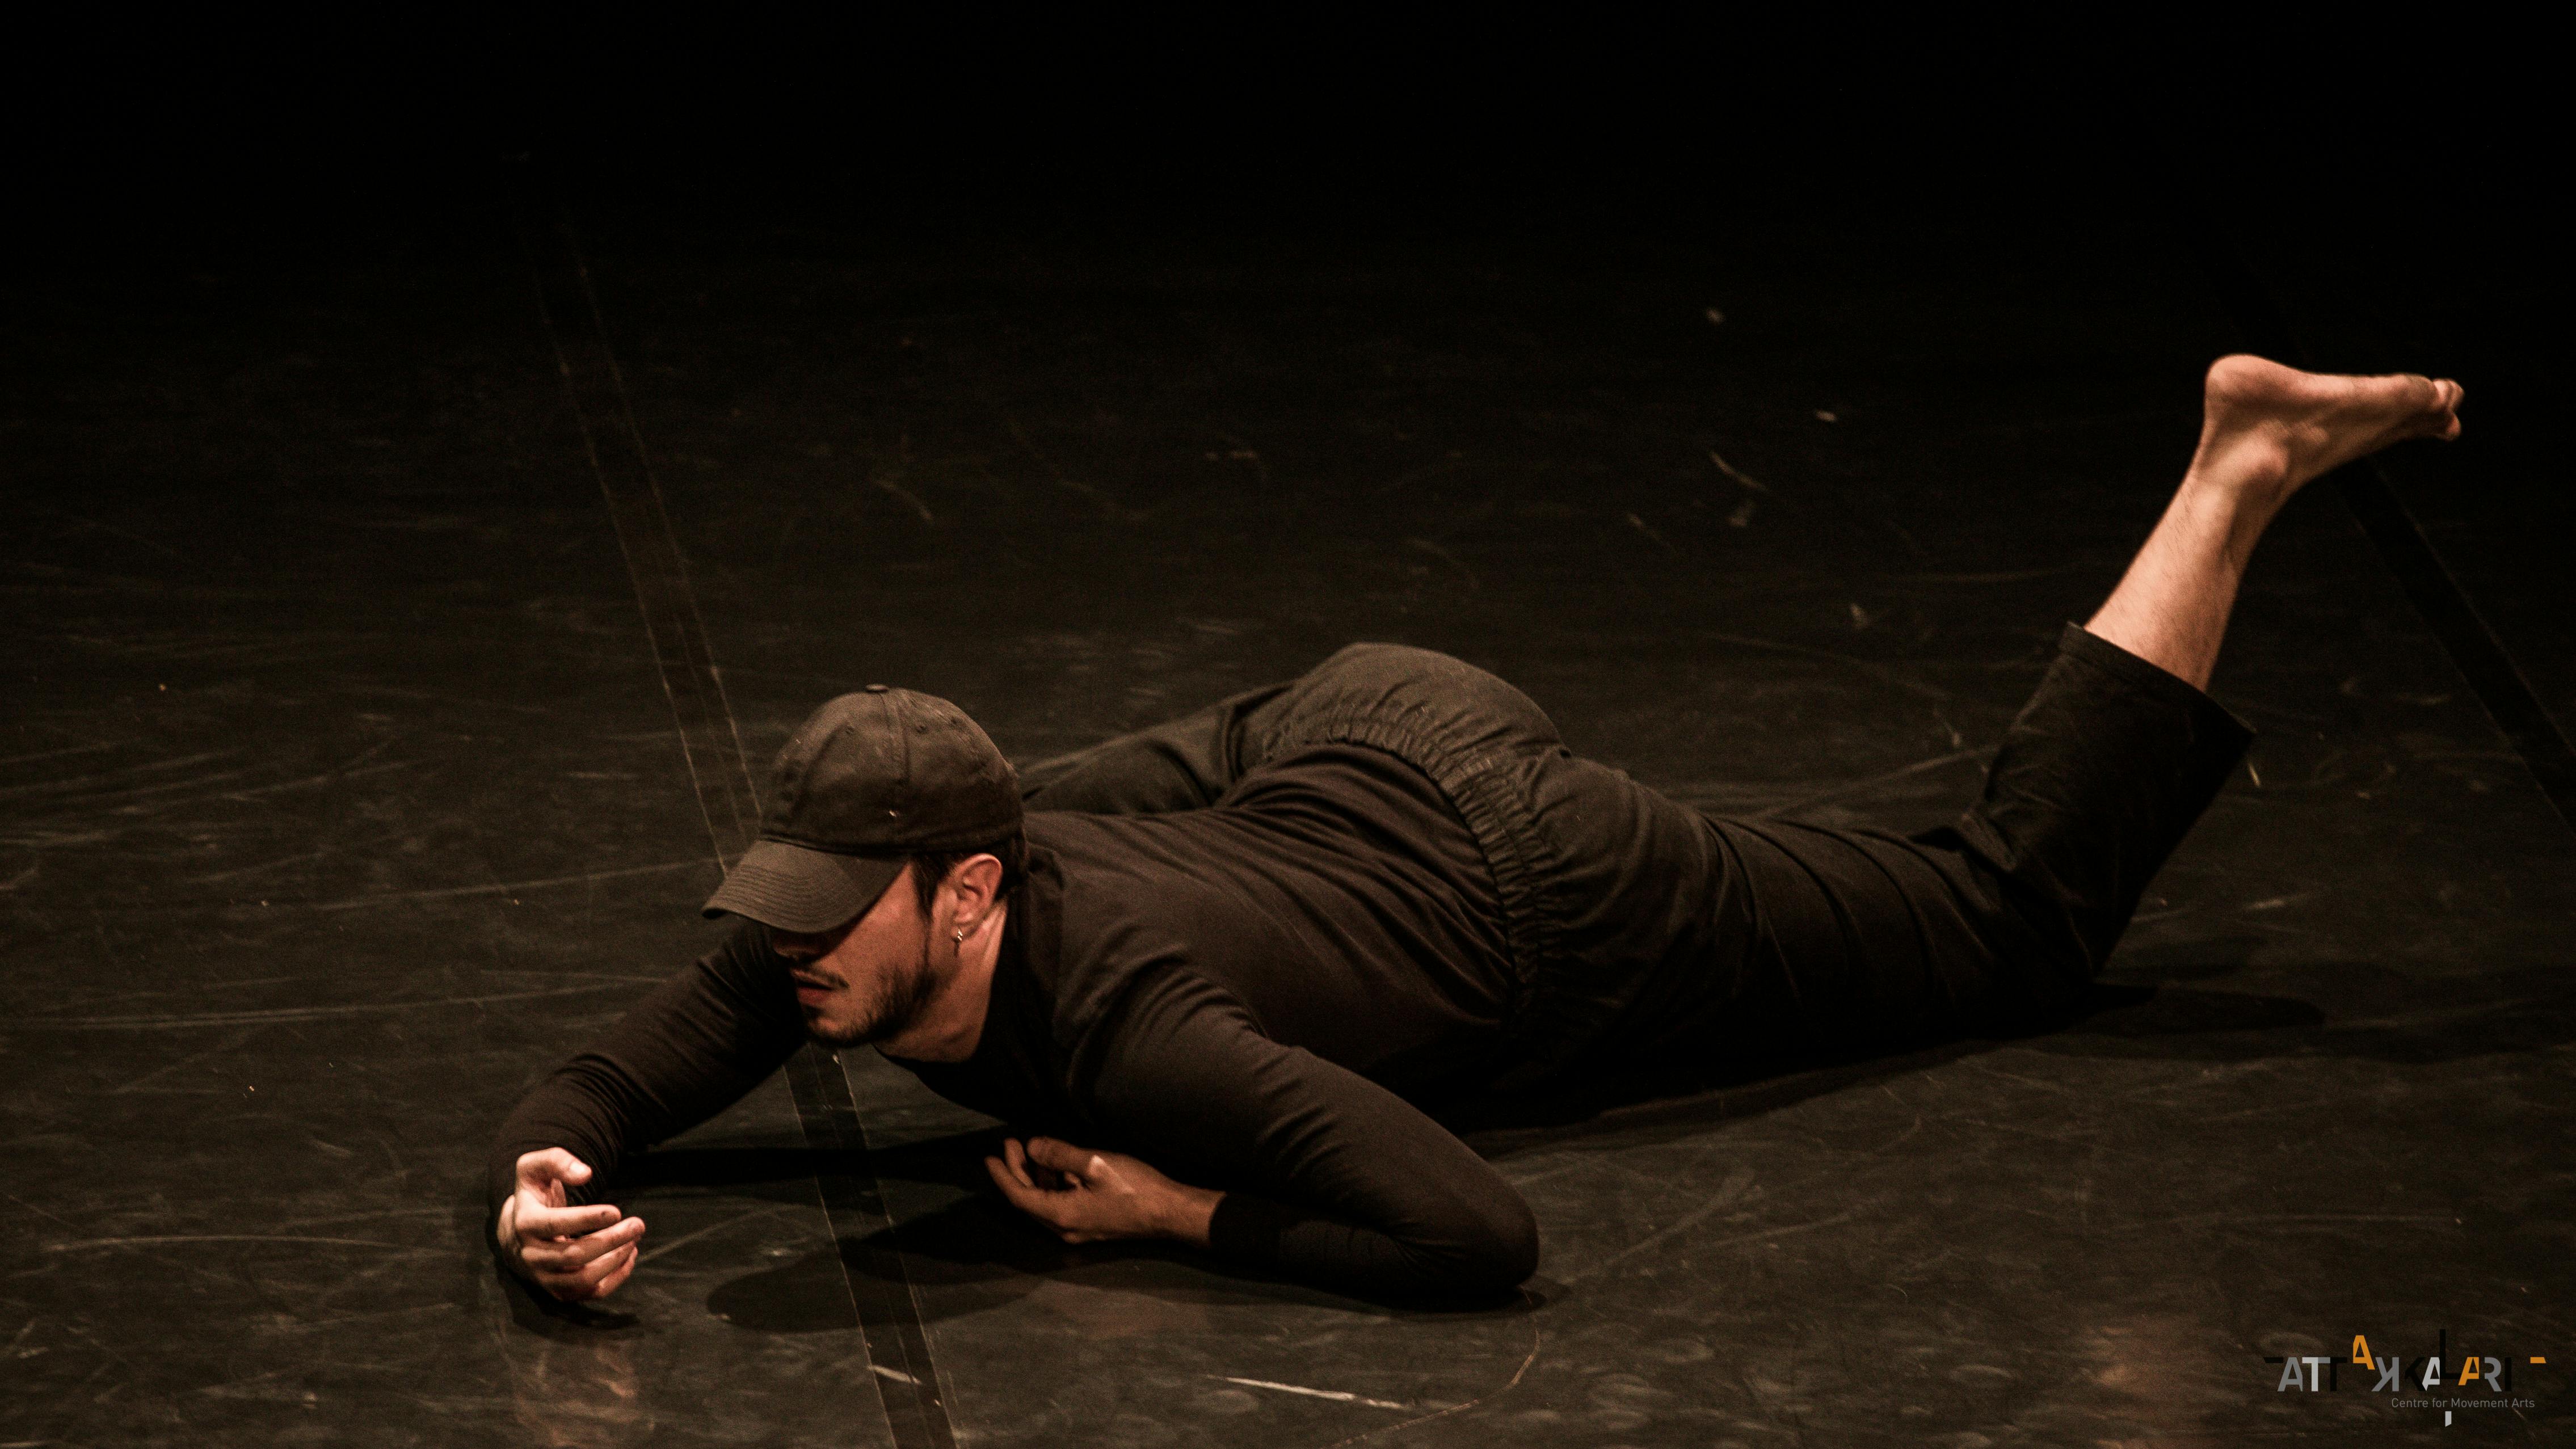 Davide Valrosso on stage lying down and dressed in black